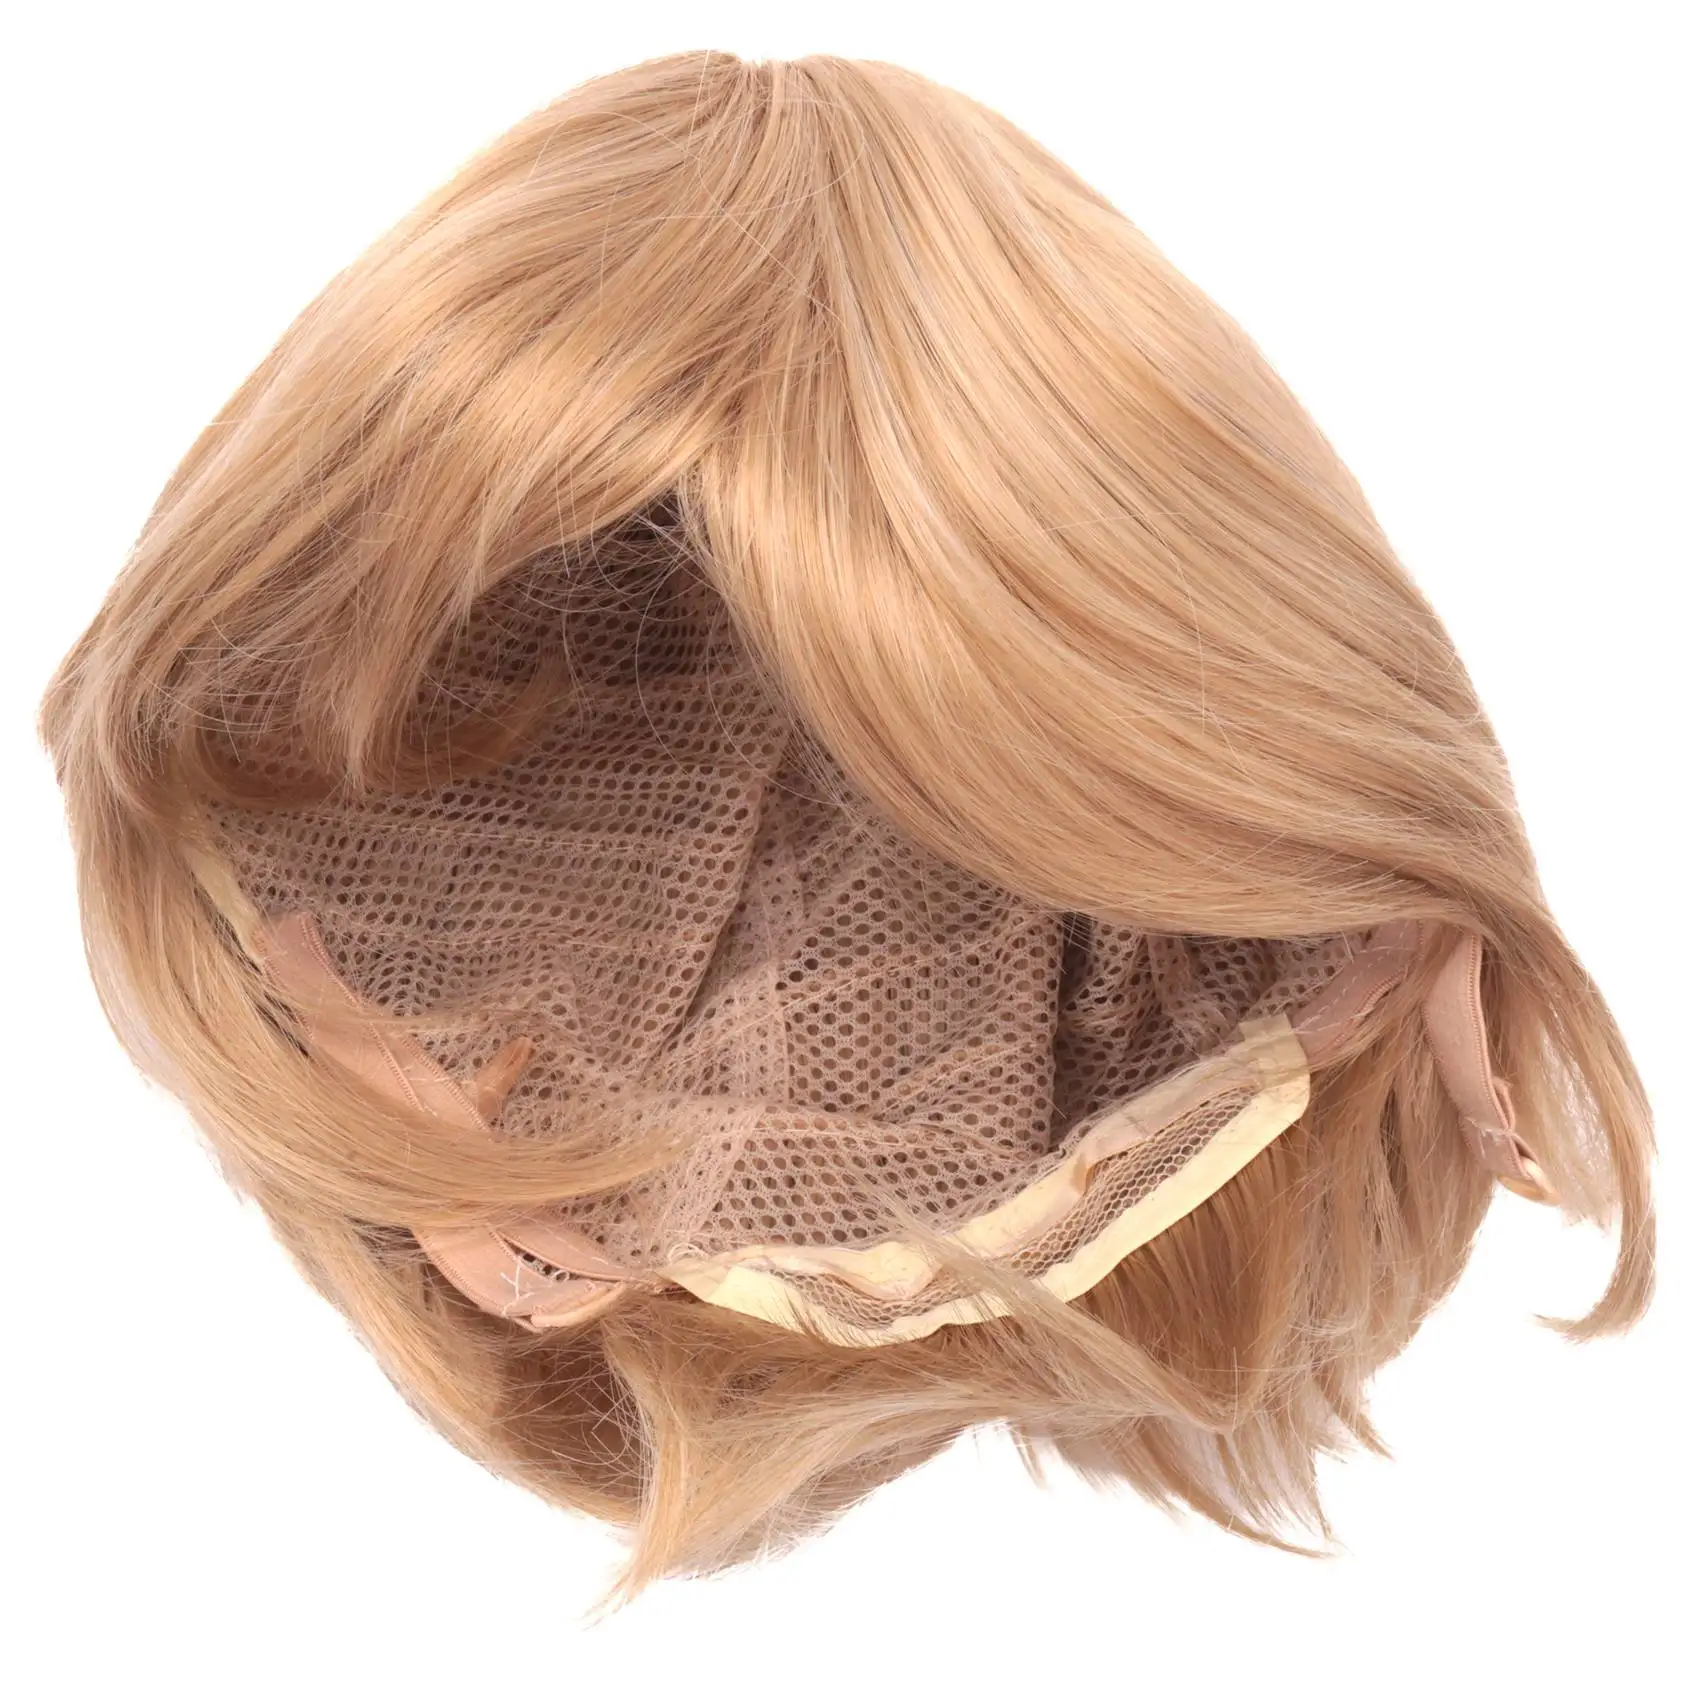 

Short Layered Fluffy Wavy Full Synthetic Wig Blonde Highlights